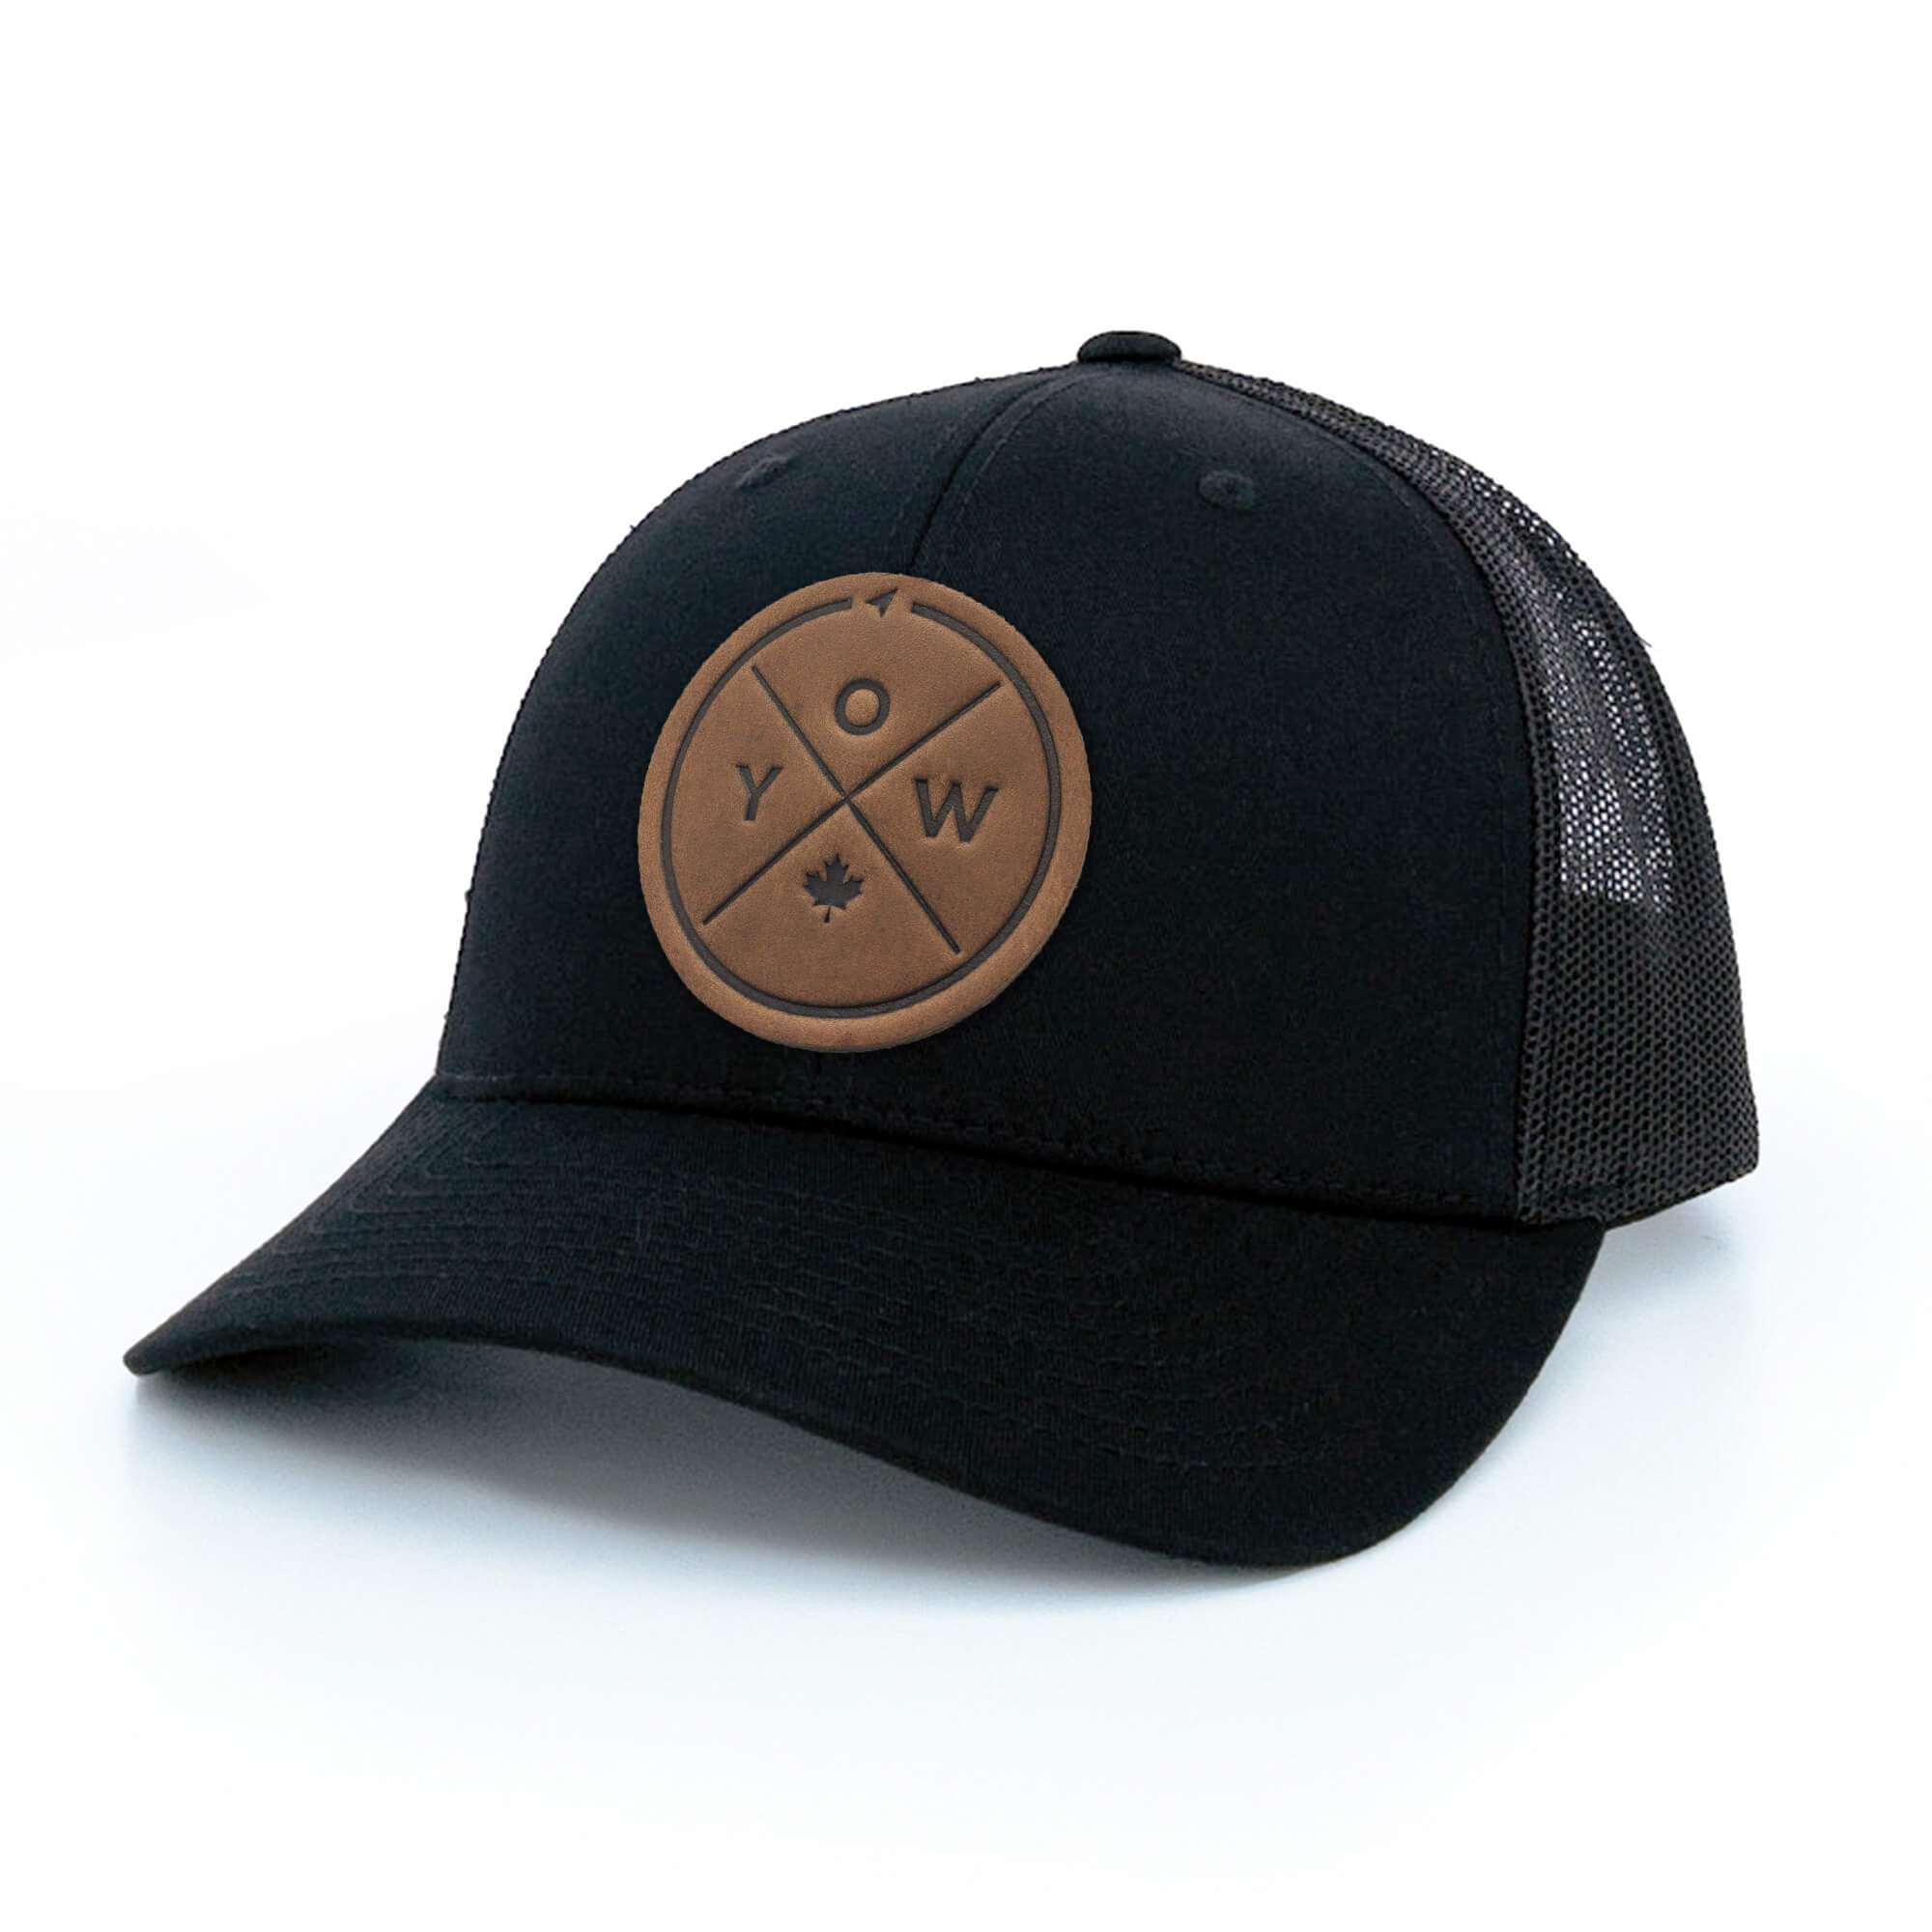 Black trucker hat with full-grain leather patch with YOW embossing | BLACK-002-008, CHARC-002-008, NAVY-002-008, HGREY-002-008, MOSS-002-008, BROWN-002-008